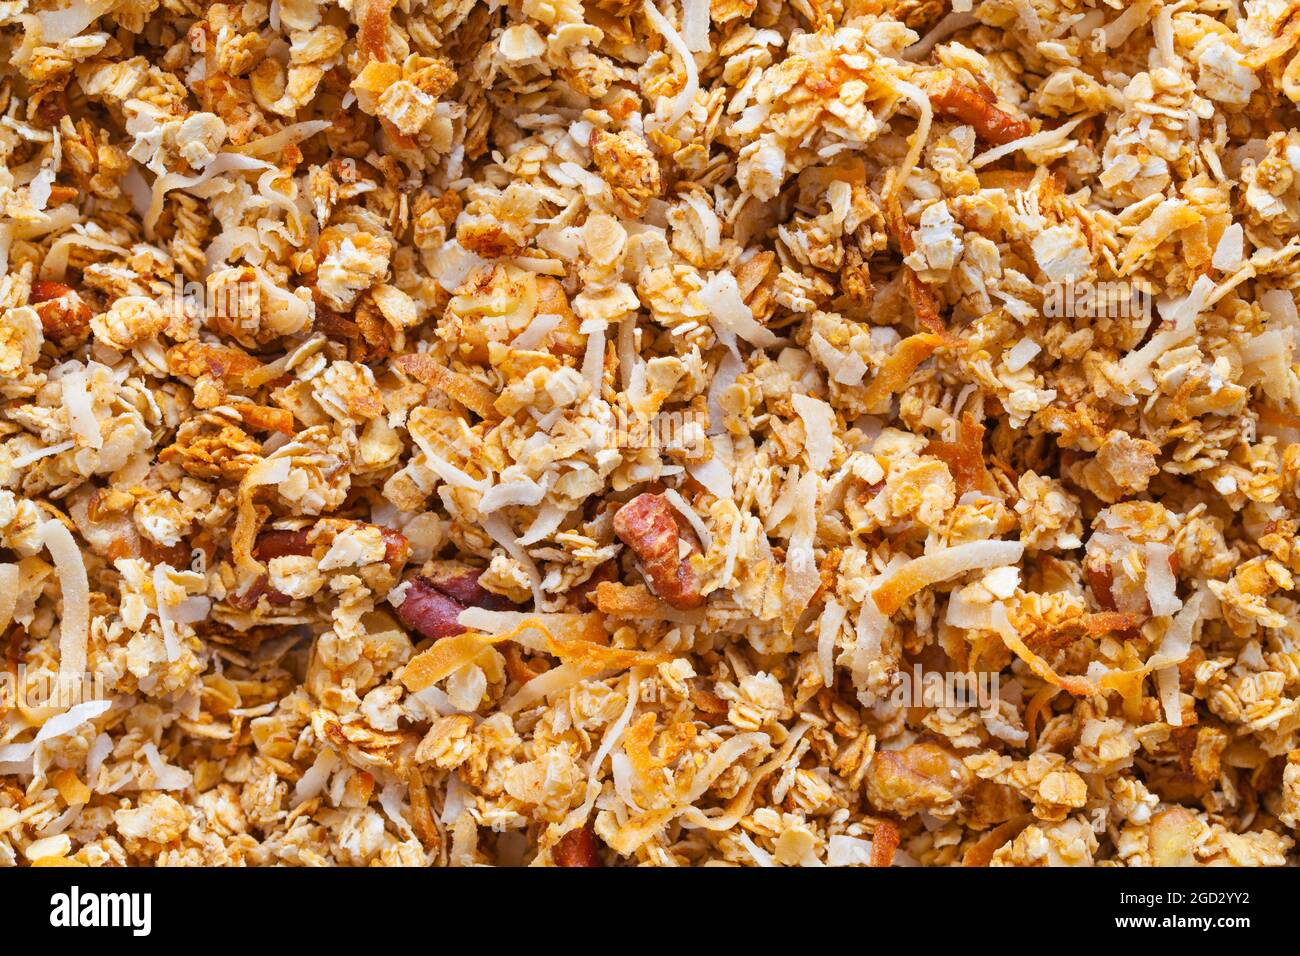 Pile of Homemade Granola Cereal Background Texture. Stock Photo